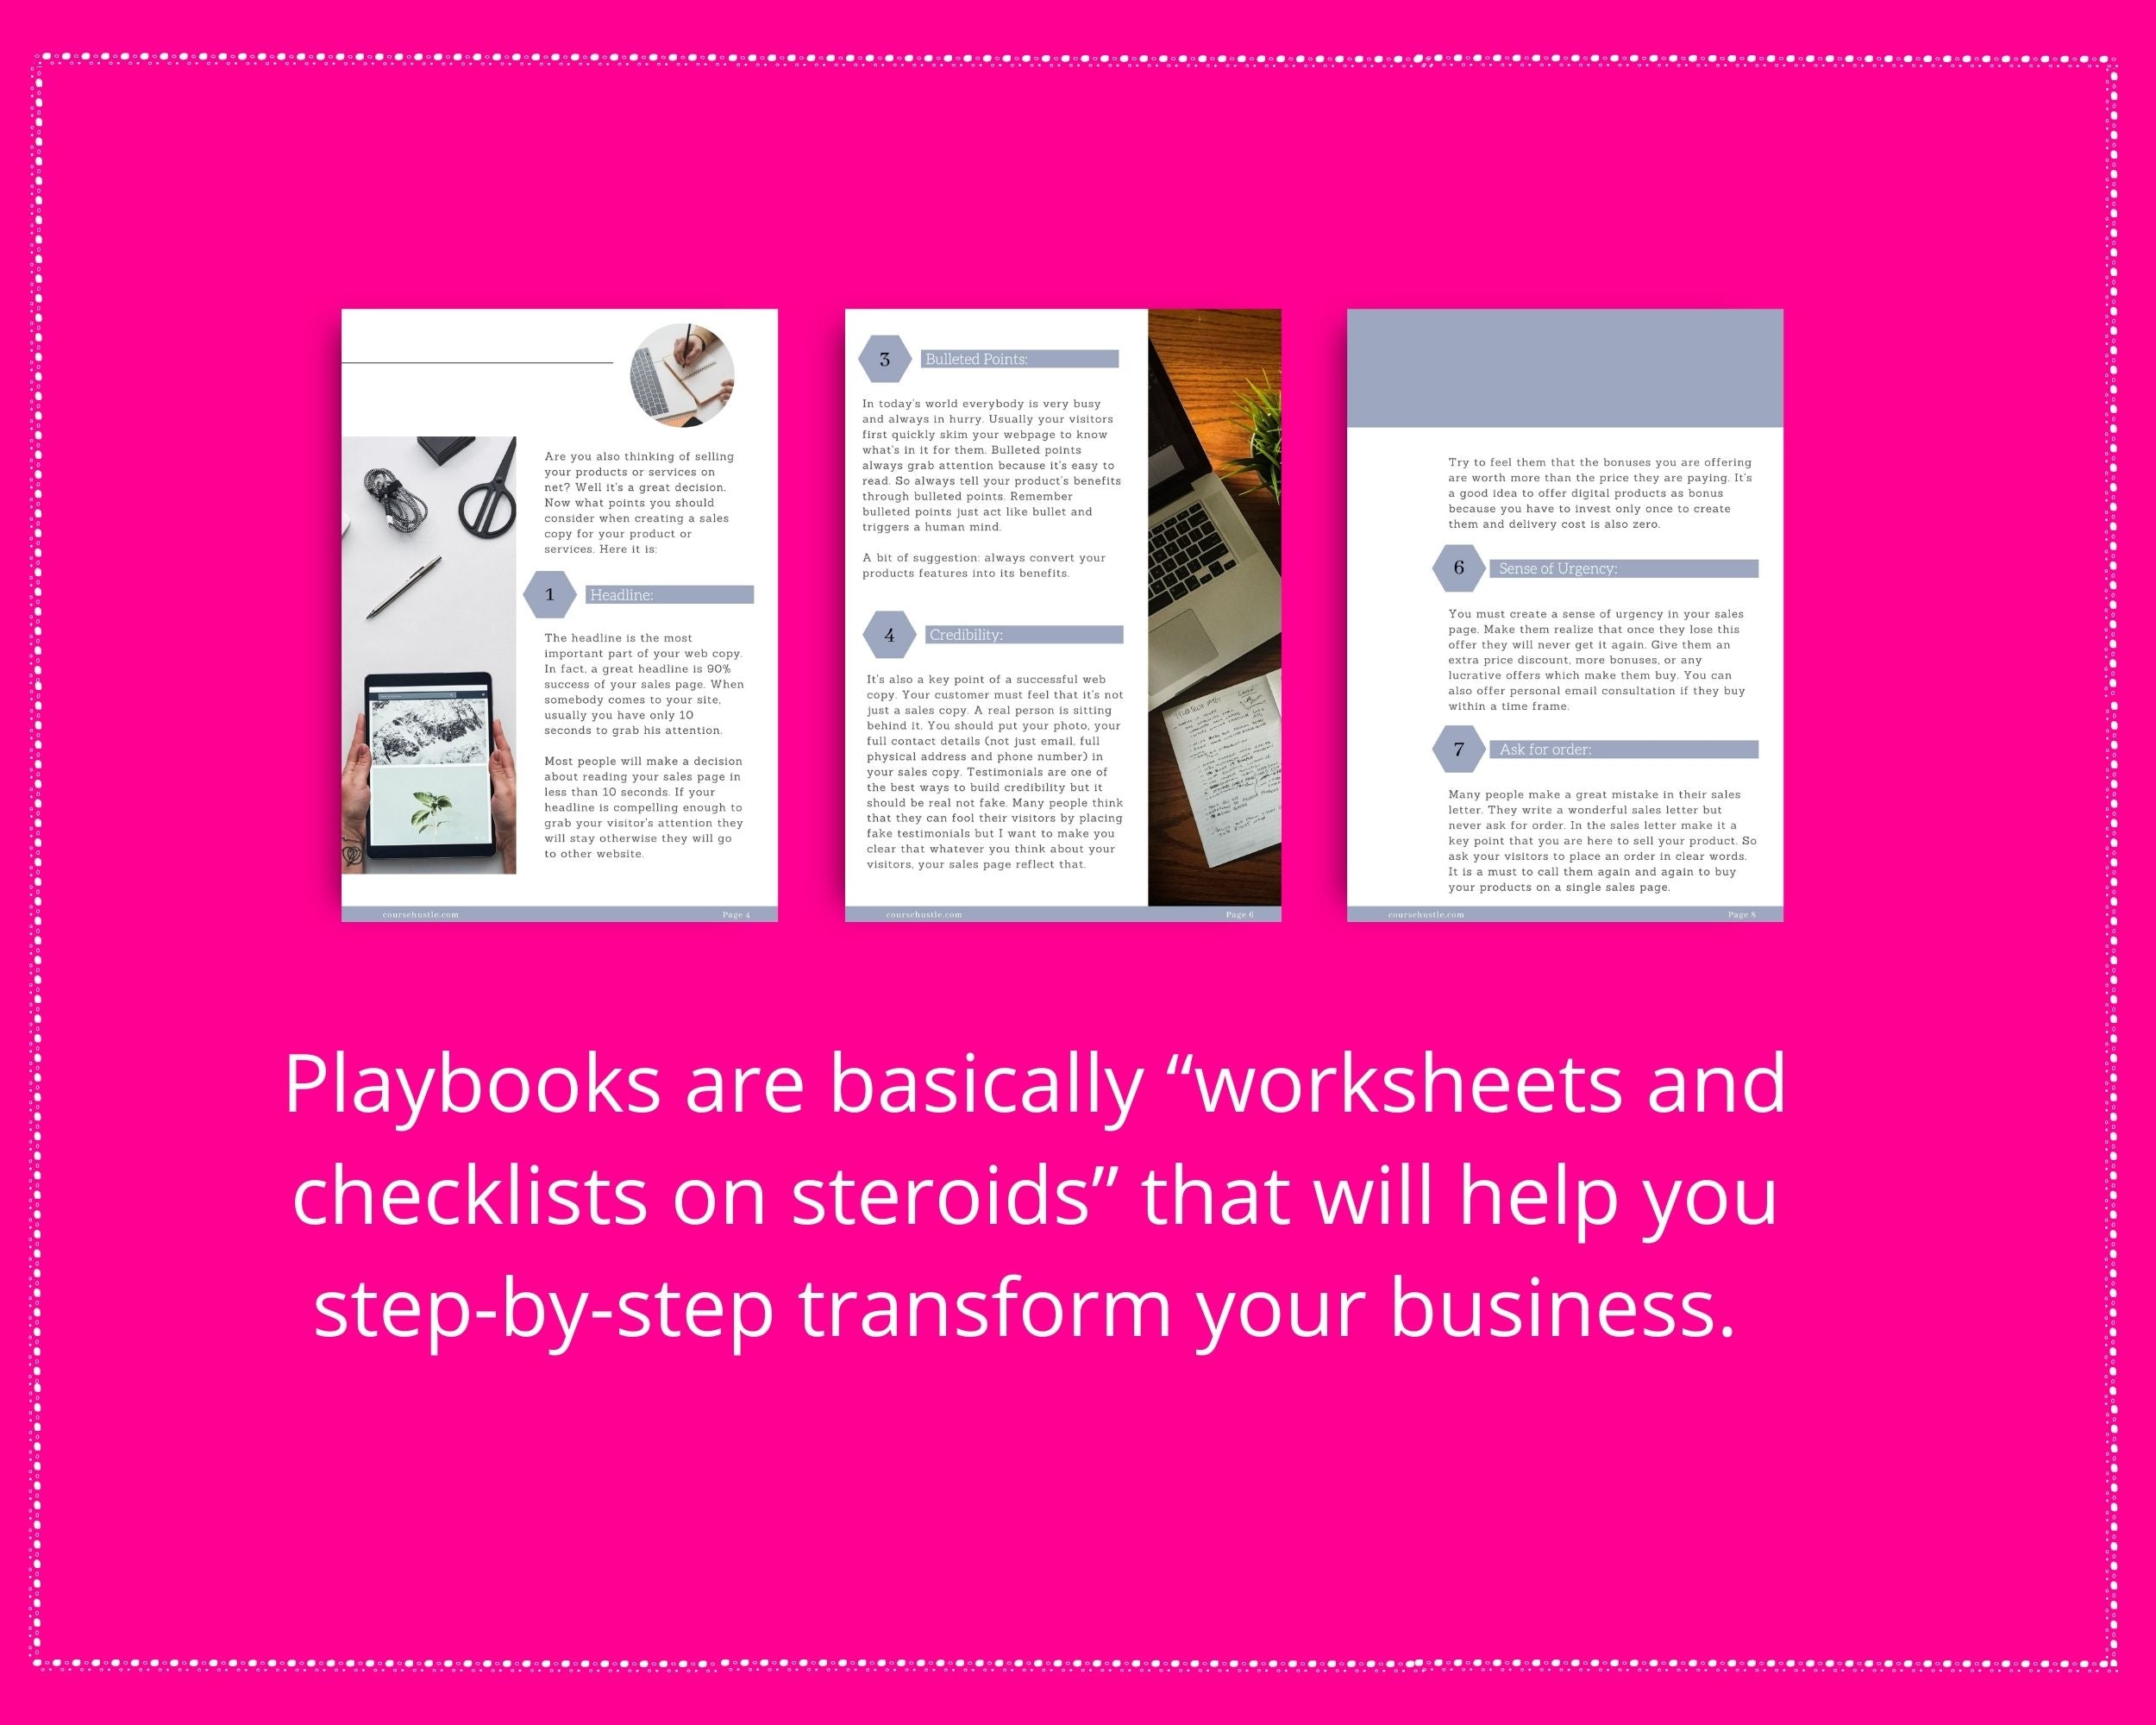 Done-for-You Copywriting Formula Playbook in Canva